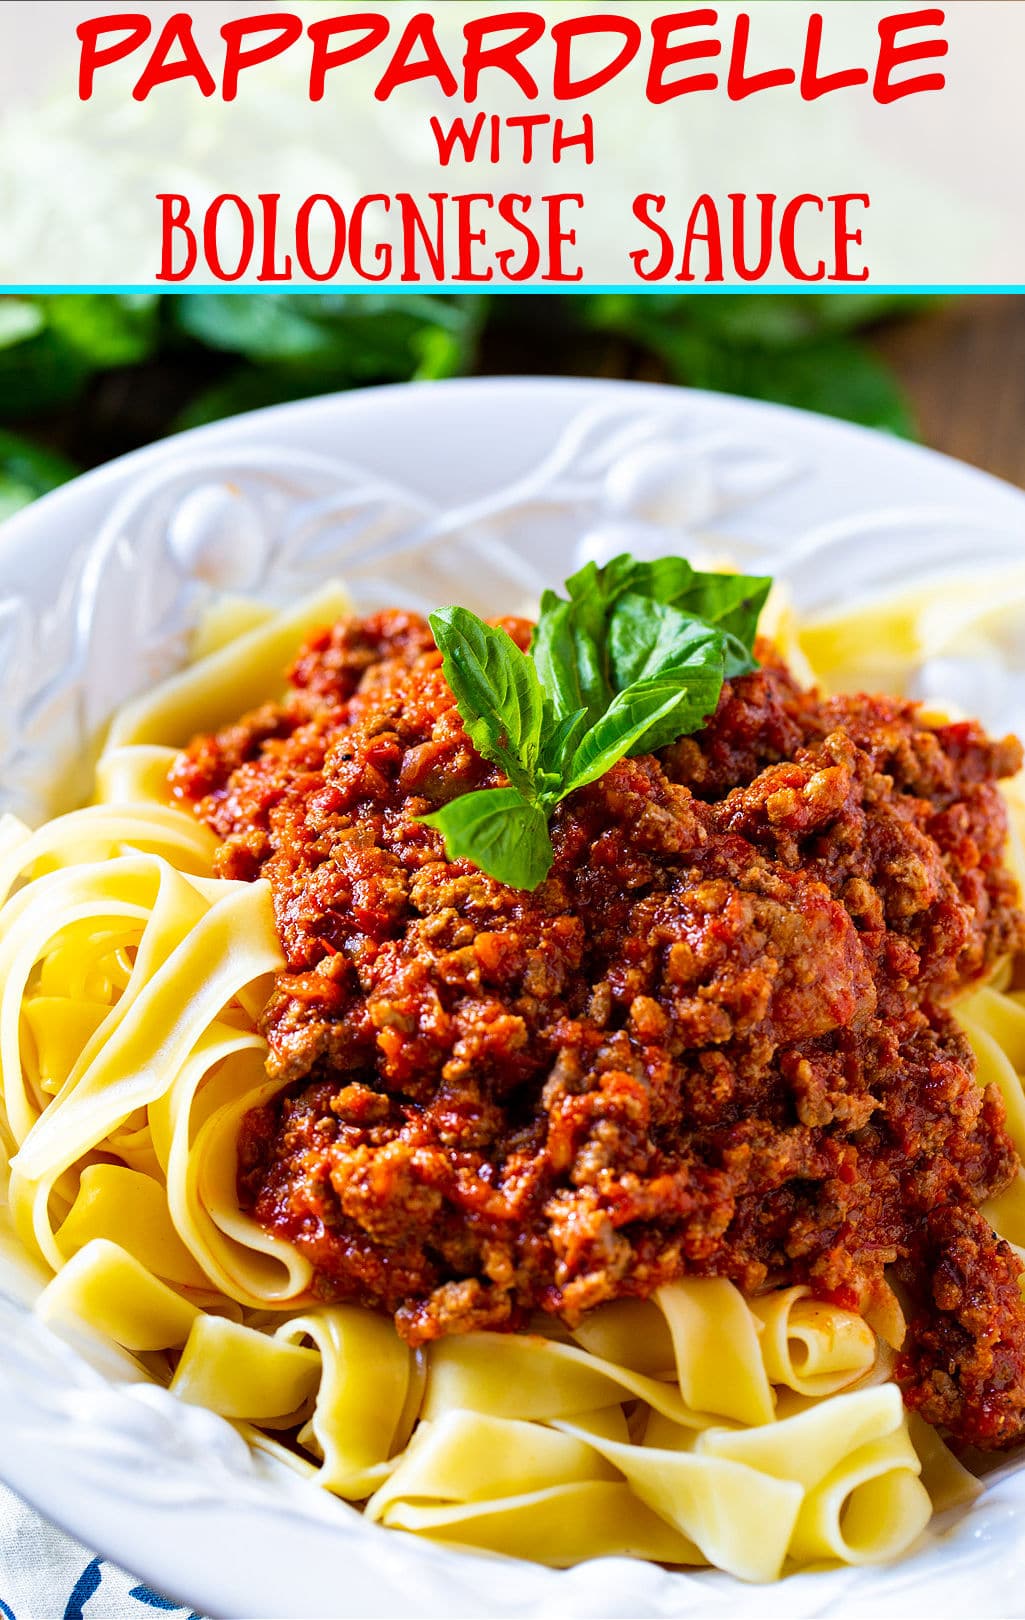 Pappardelle with Bolognese Sauce in a pasta bowl.